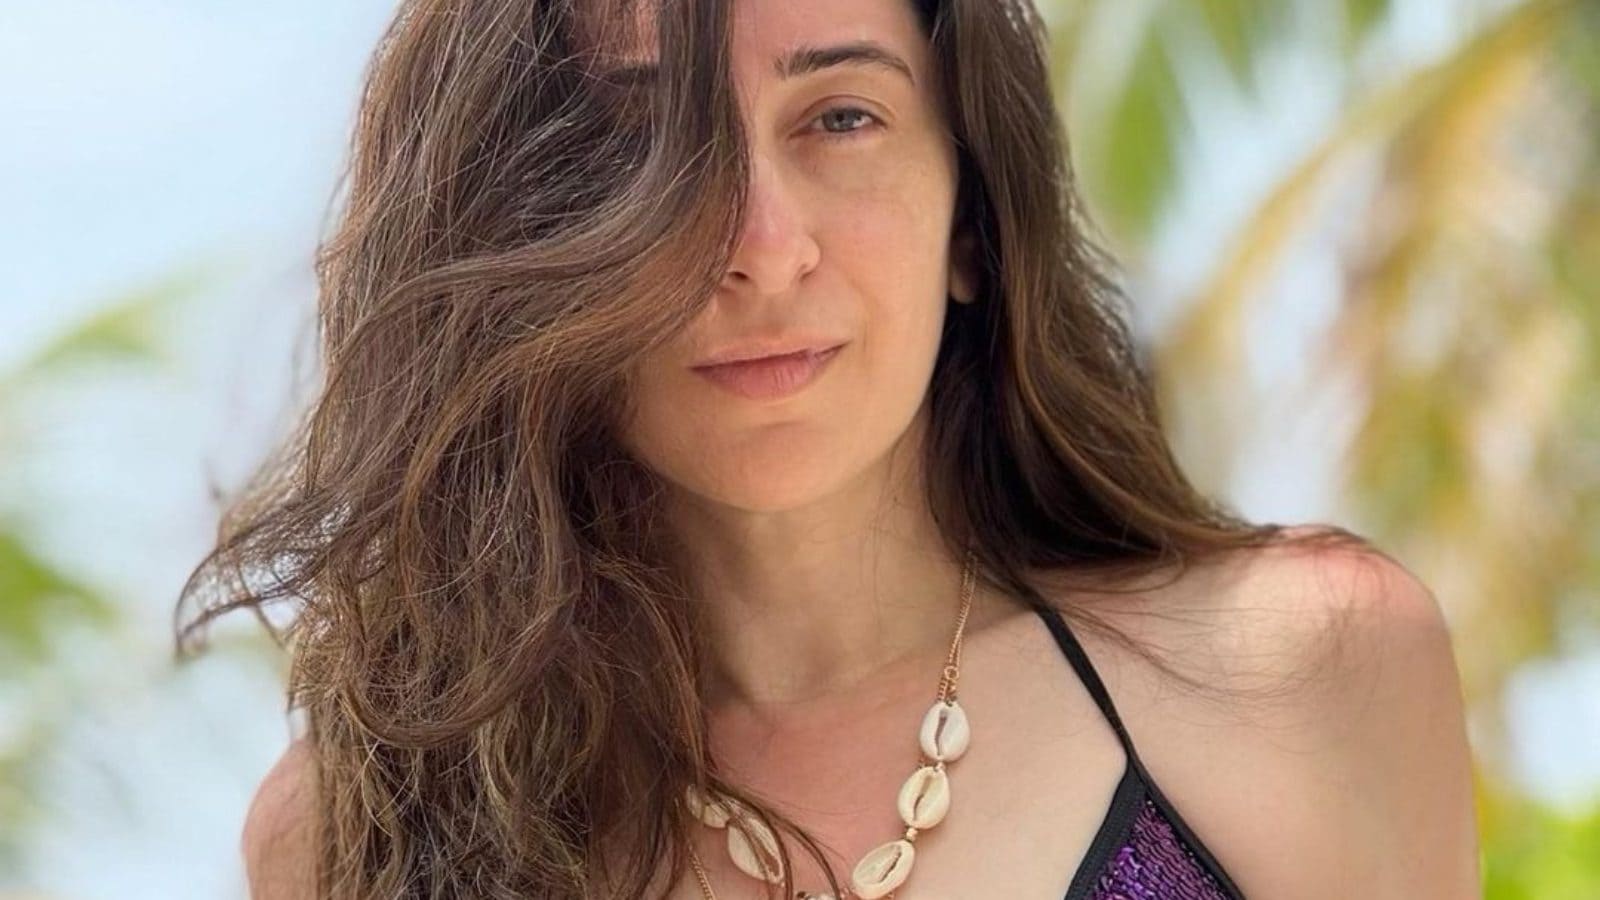 Karisma Kapoor Ka Sex - Karisma Kapoor Reminds Age Is Just a Number with Her Latest Sexy Pic, Says  'I Sea You' - News18